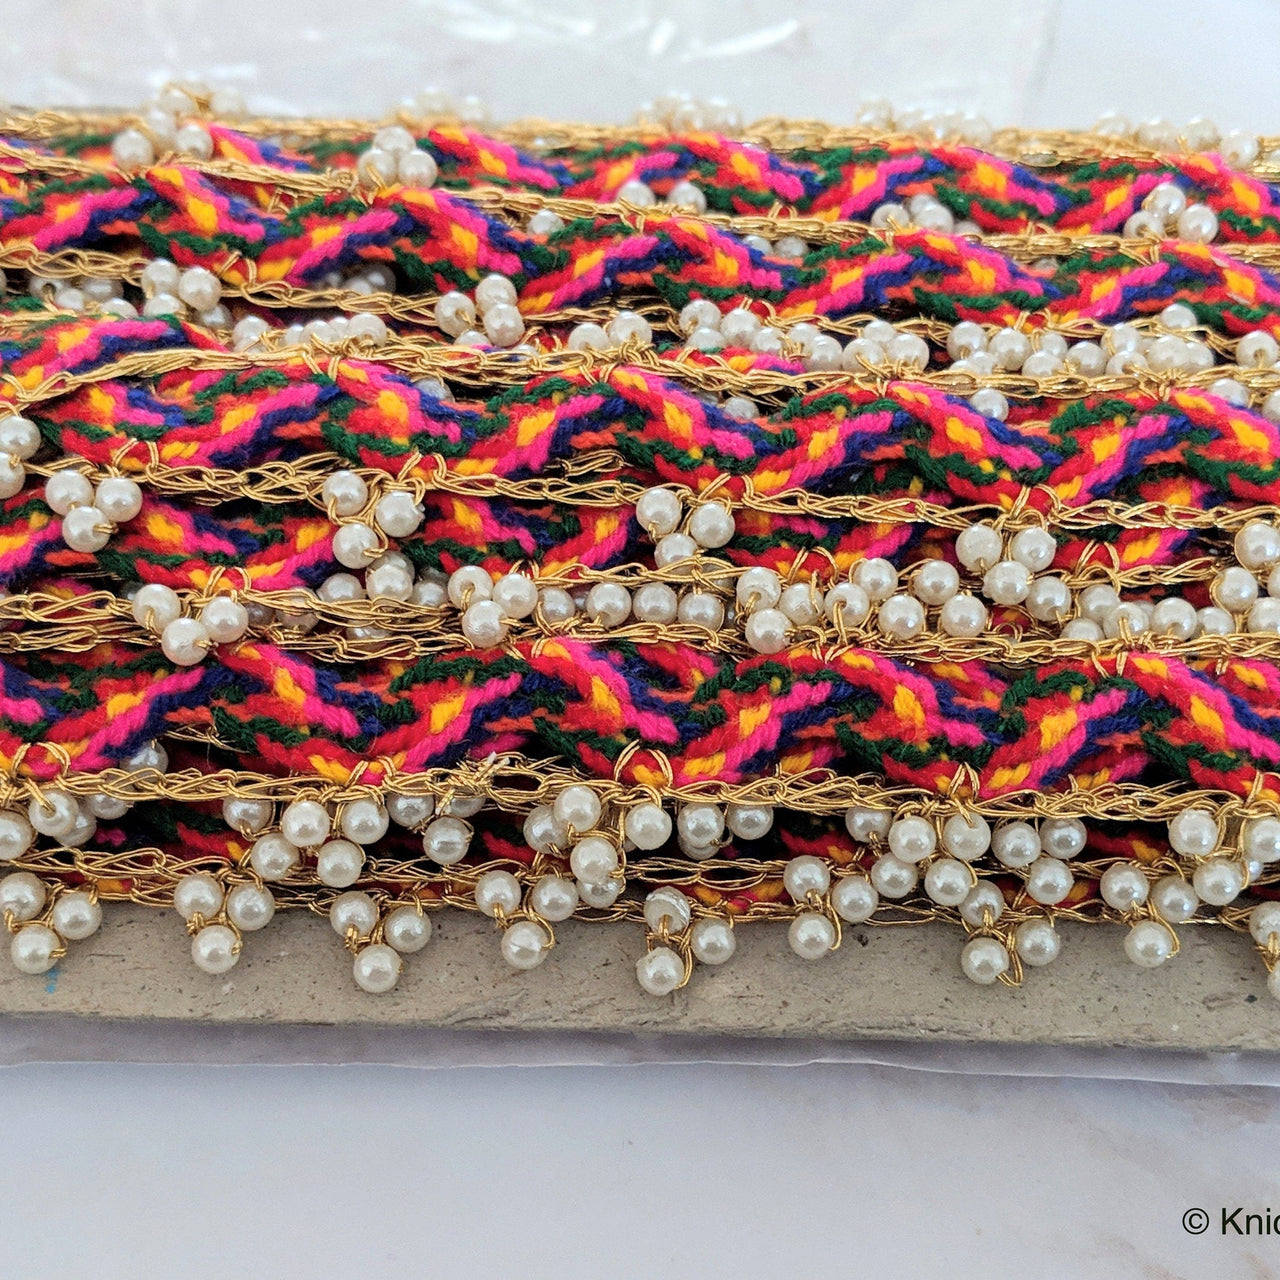 Multicoloured Wool Woven Trim With Gold Piping and Off White Pearl Beads, Approx. 40mm Wide - 010518L6